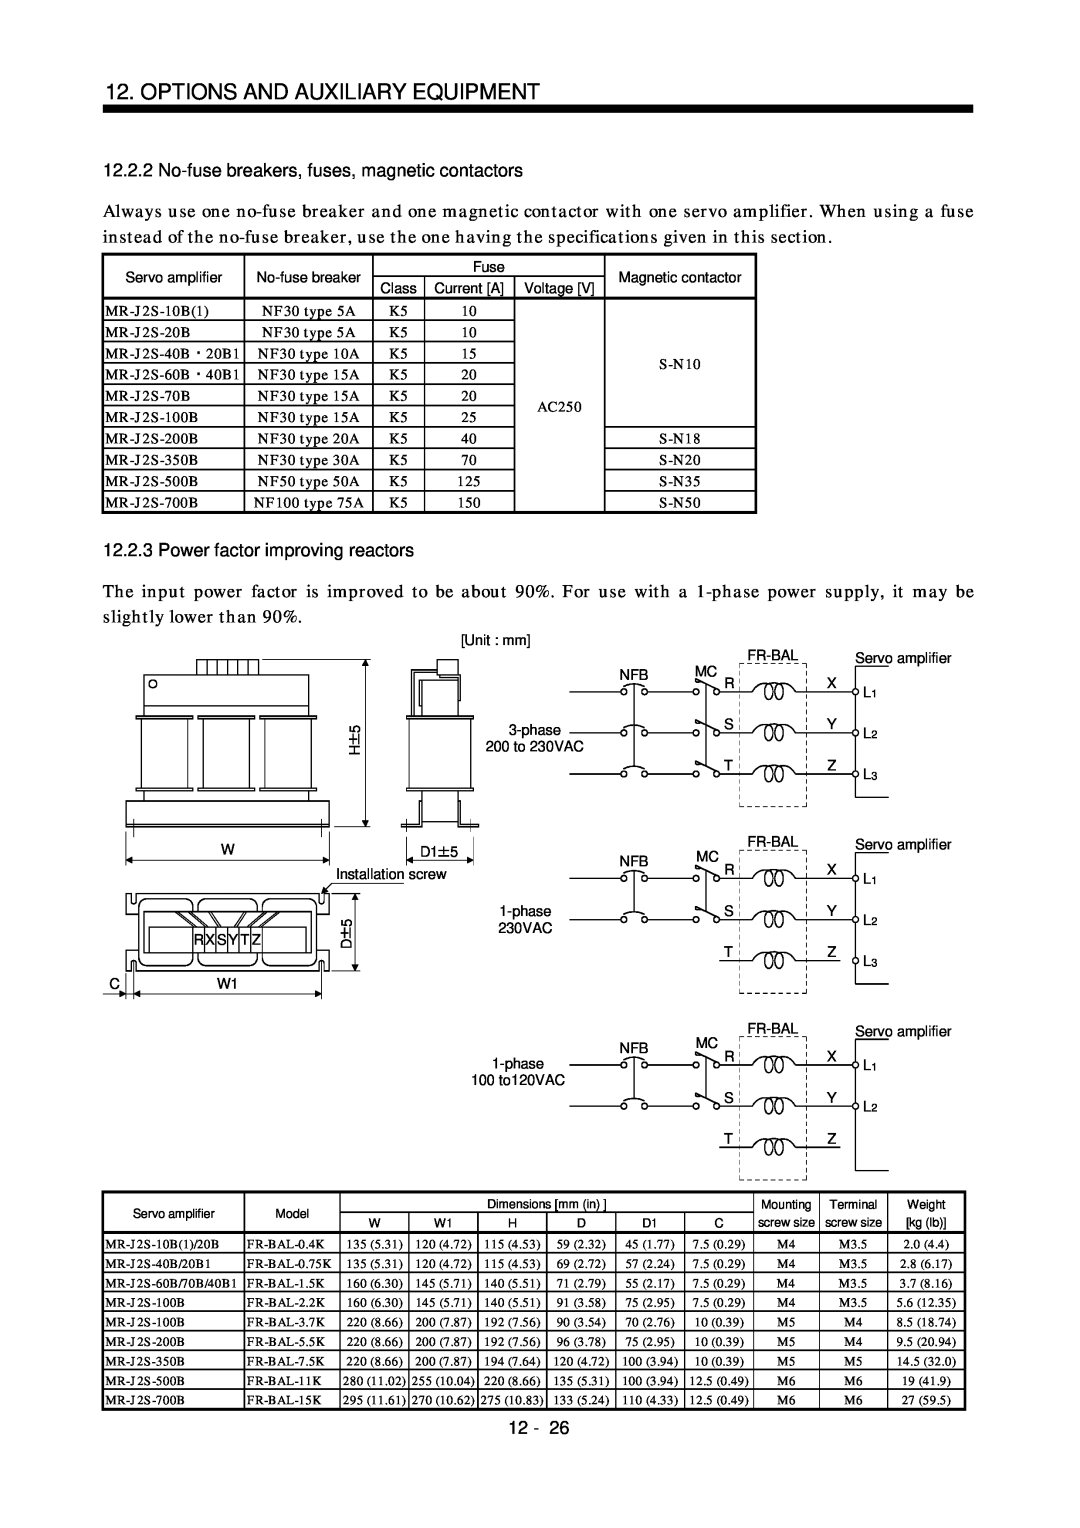 Bose MR-J2S- B instruction manual Power factor improving reactors, Options And Auxiliary Equipment, 12 